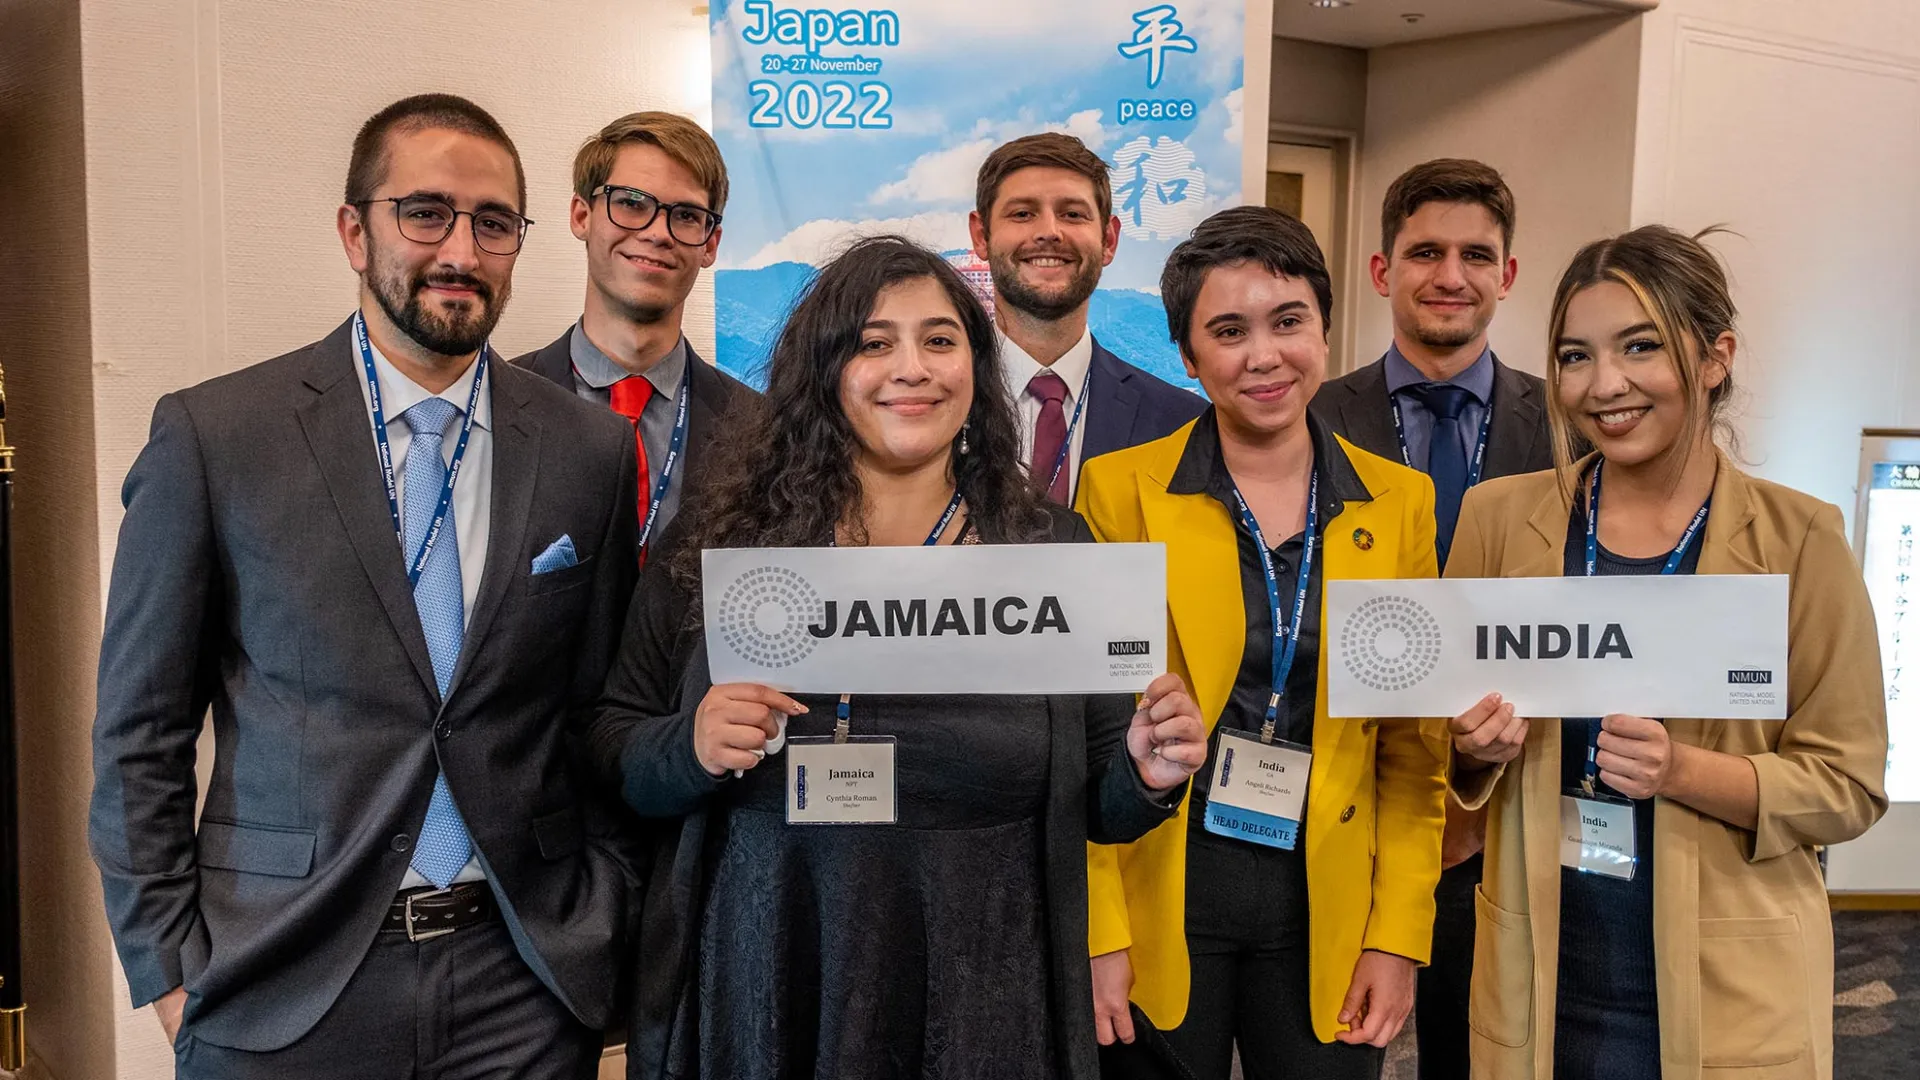 The CSUSB Model United Nations team represented the countries of Jamaica and India at the National Model United Nations-Japan conference, held in late November in Kobe, Japan.